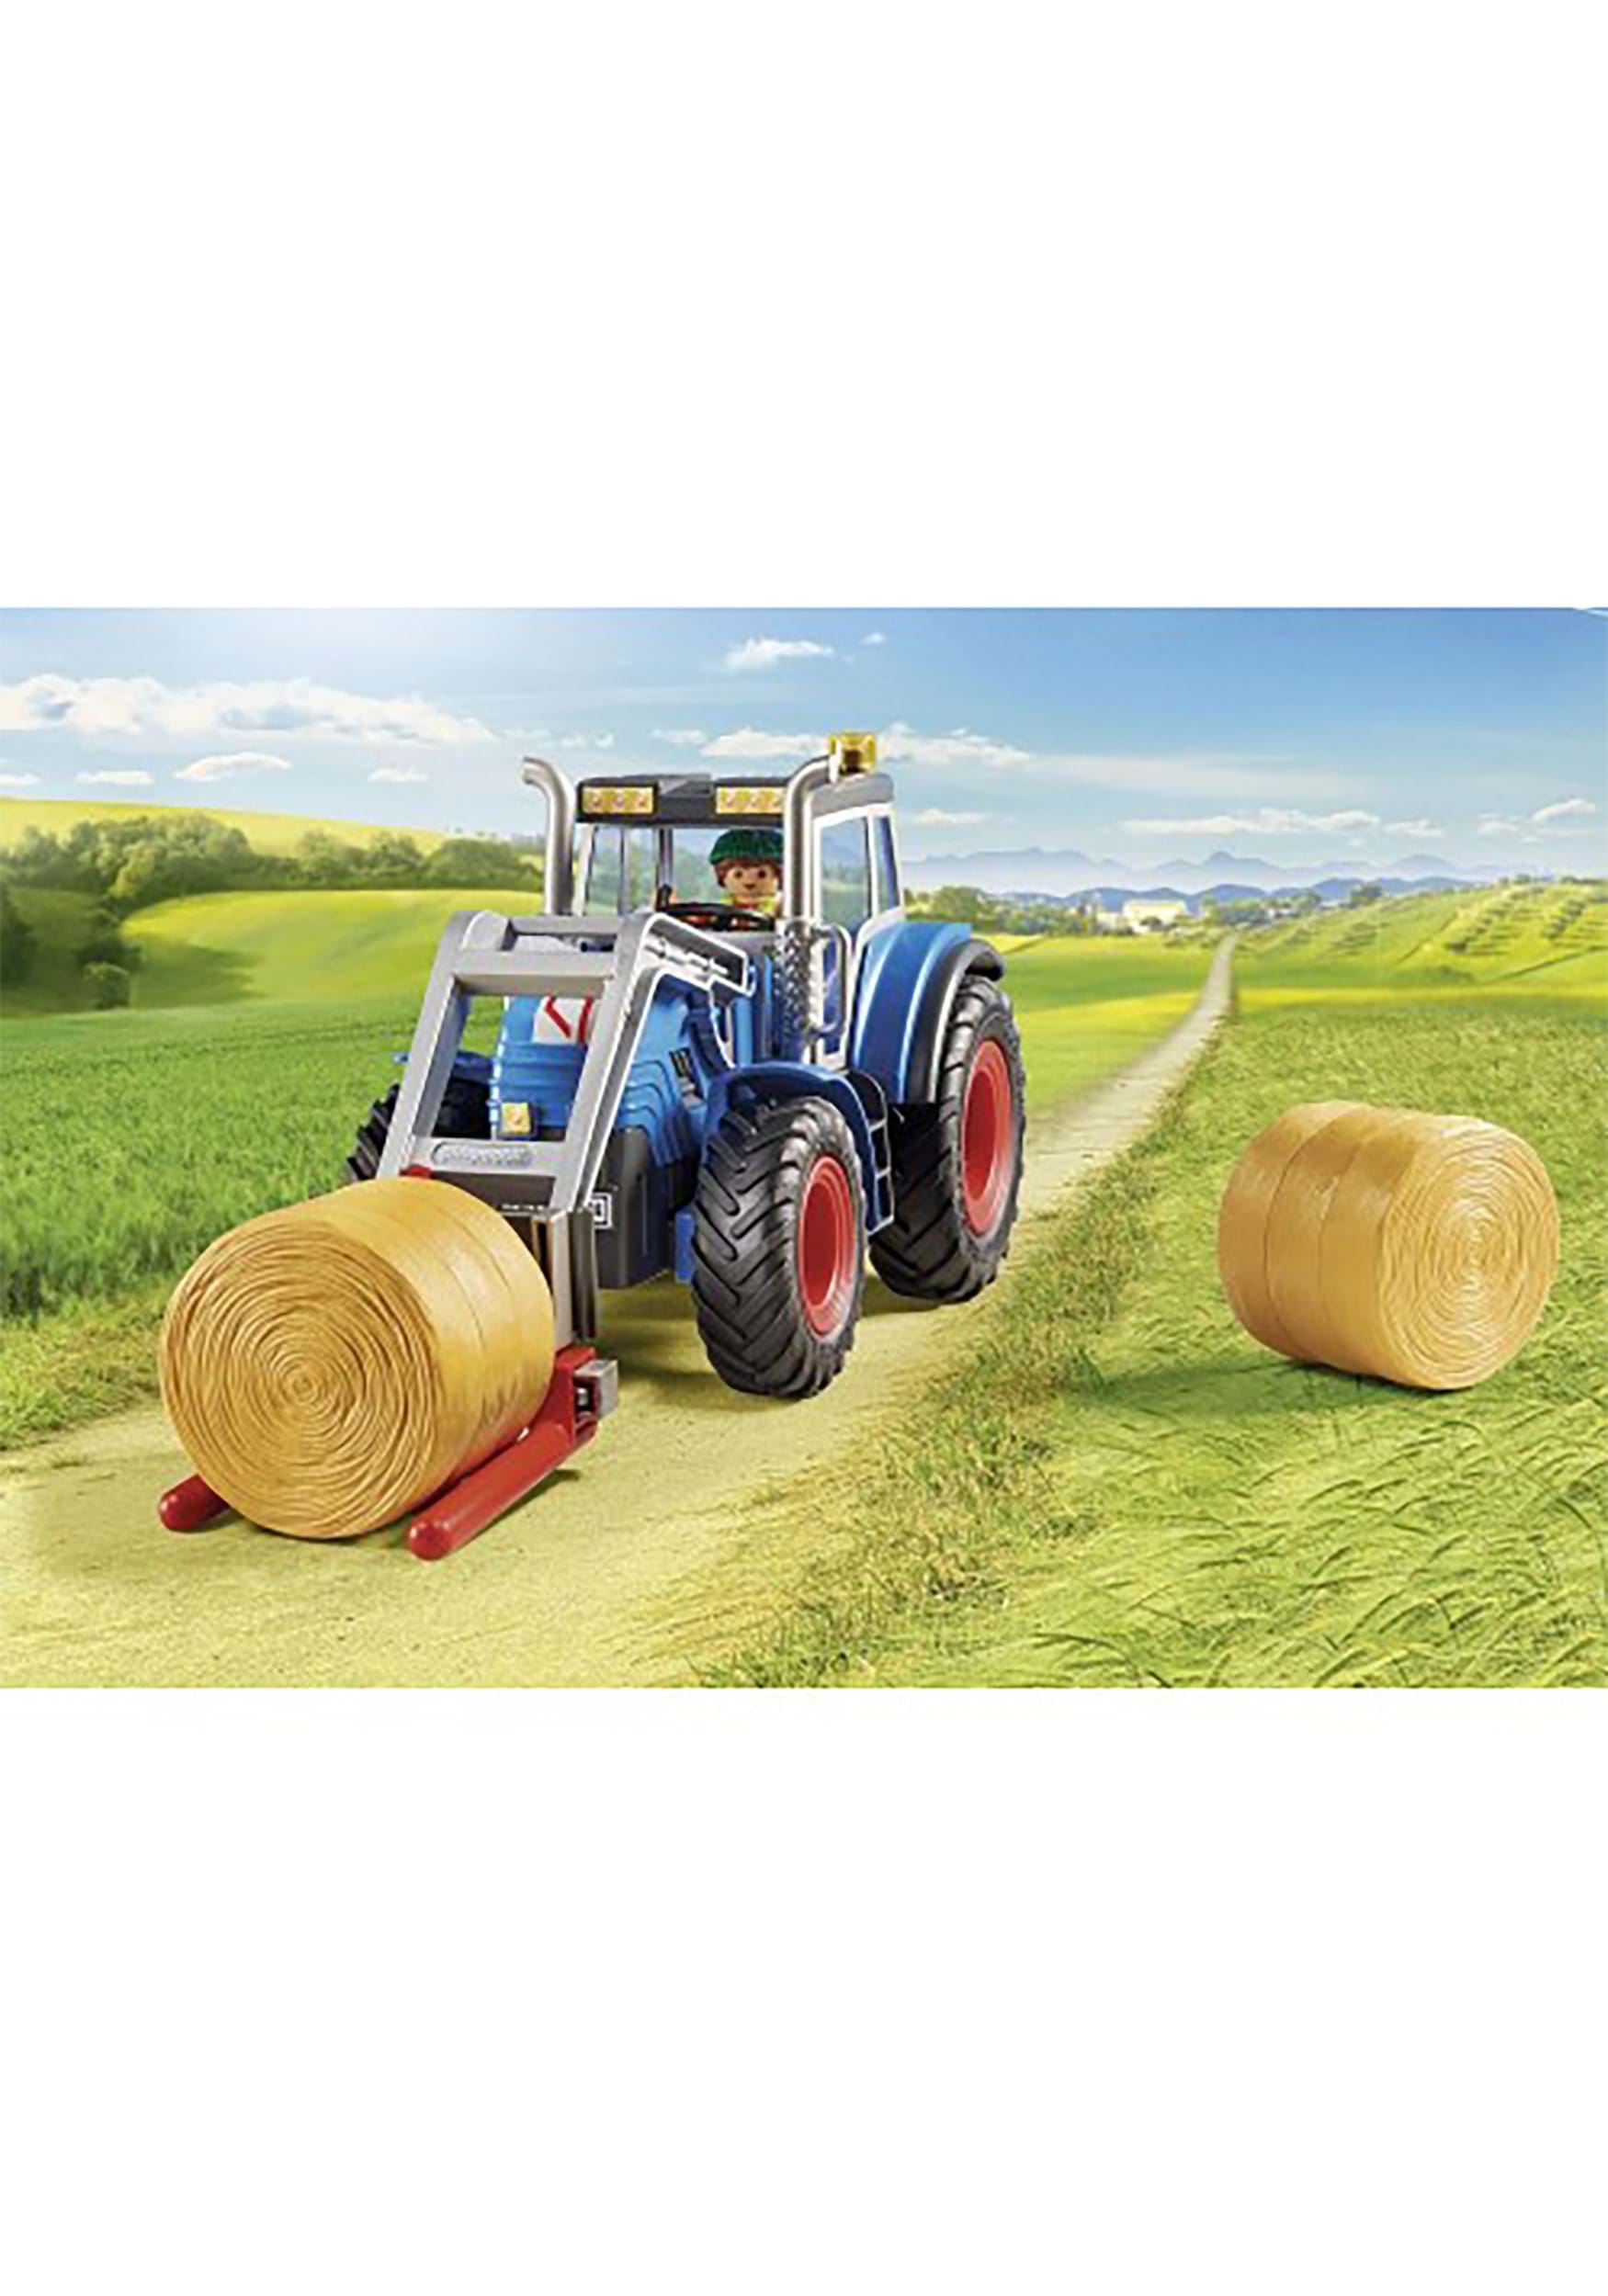 Large Tractor - 71004